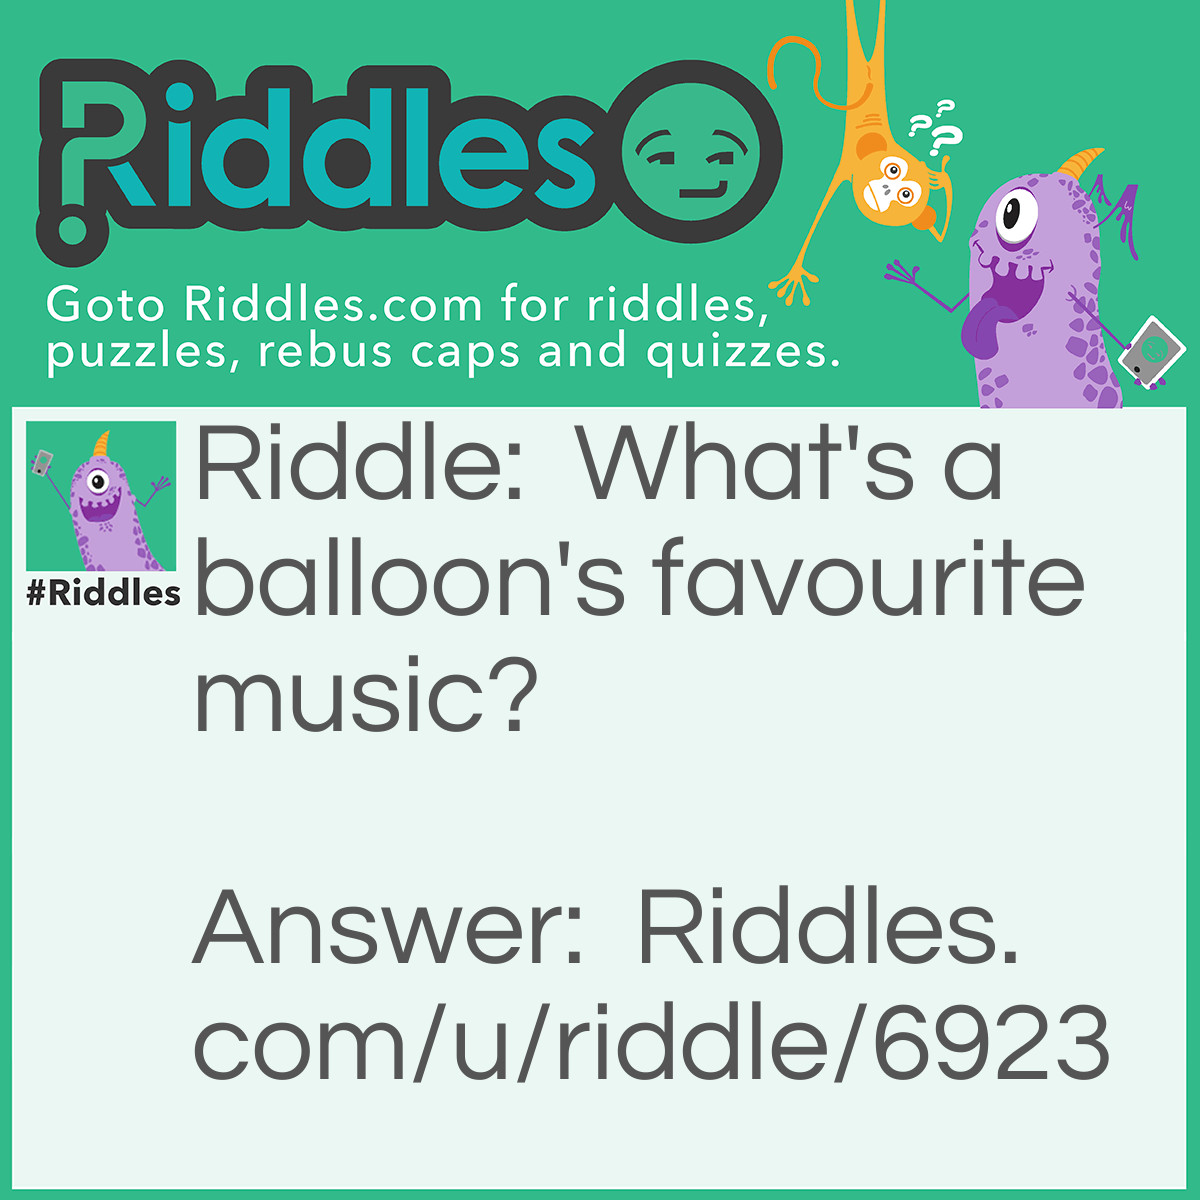 Riddle: What's a balloon's favourite music? Answer: "Pop".